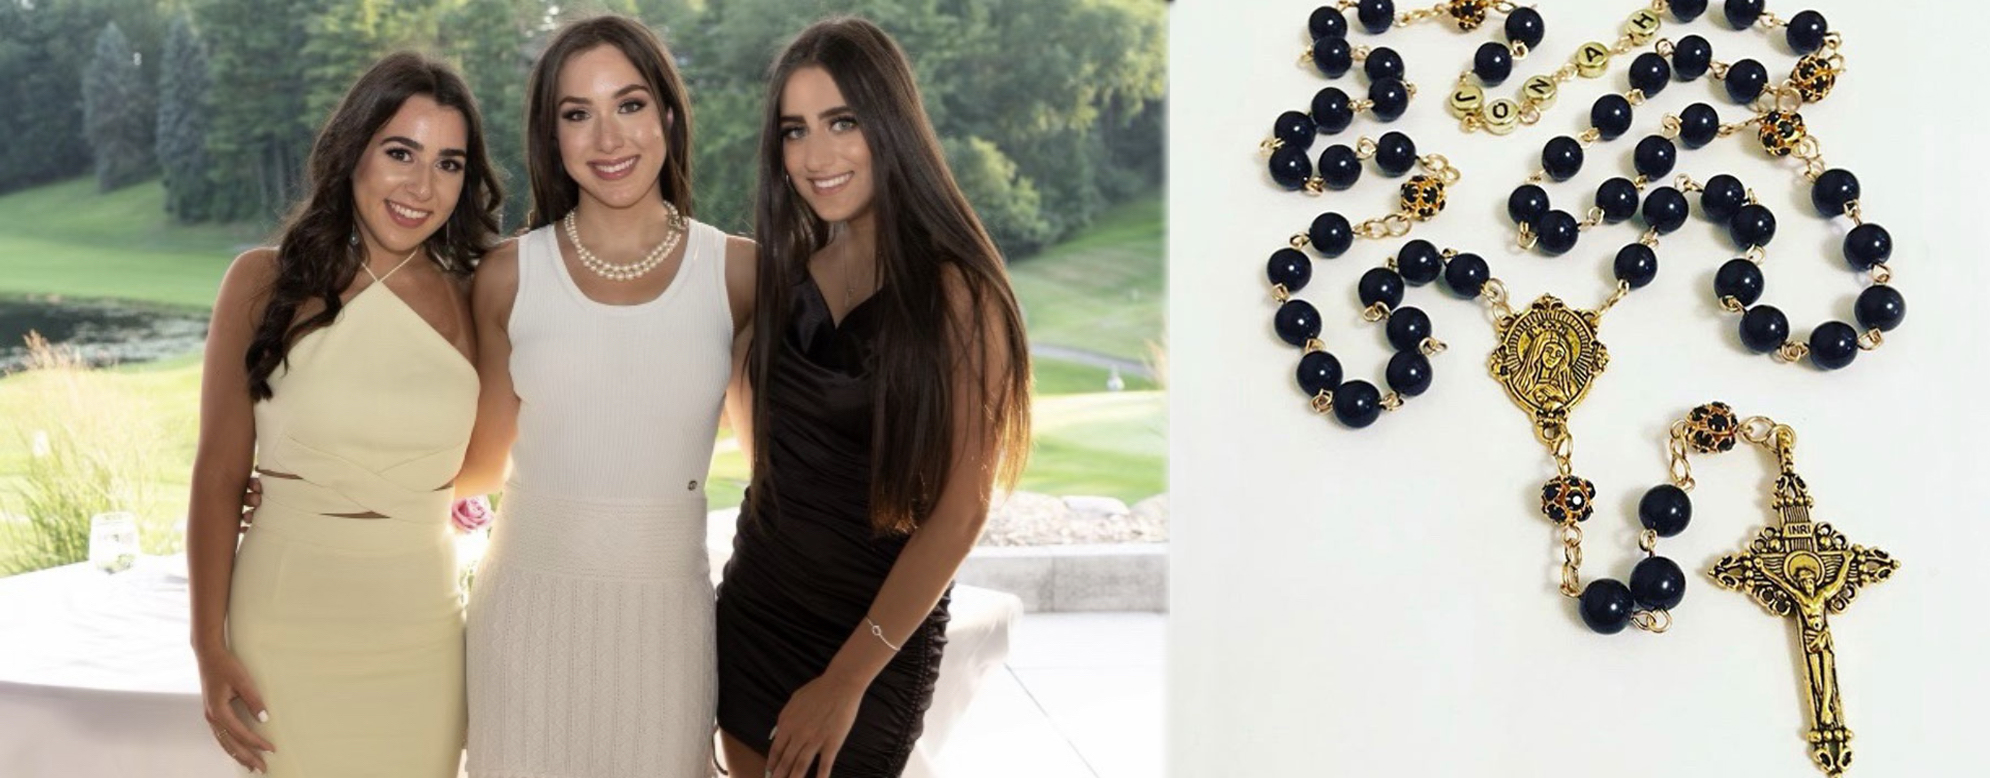 From left, sisters Taylor Bahoora, Danielle Raikany and Madelyn Bahoora pose together for a photograph. On the right is a picture of one of the custom rosaries the sisters make.